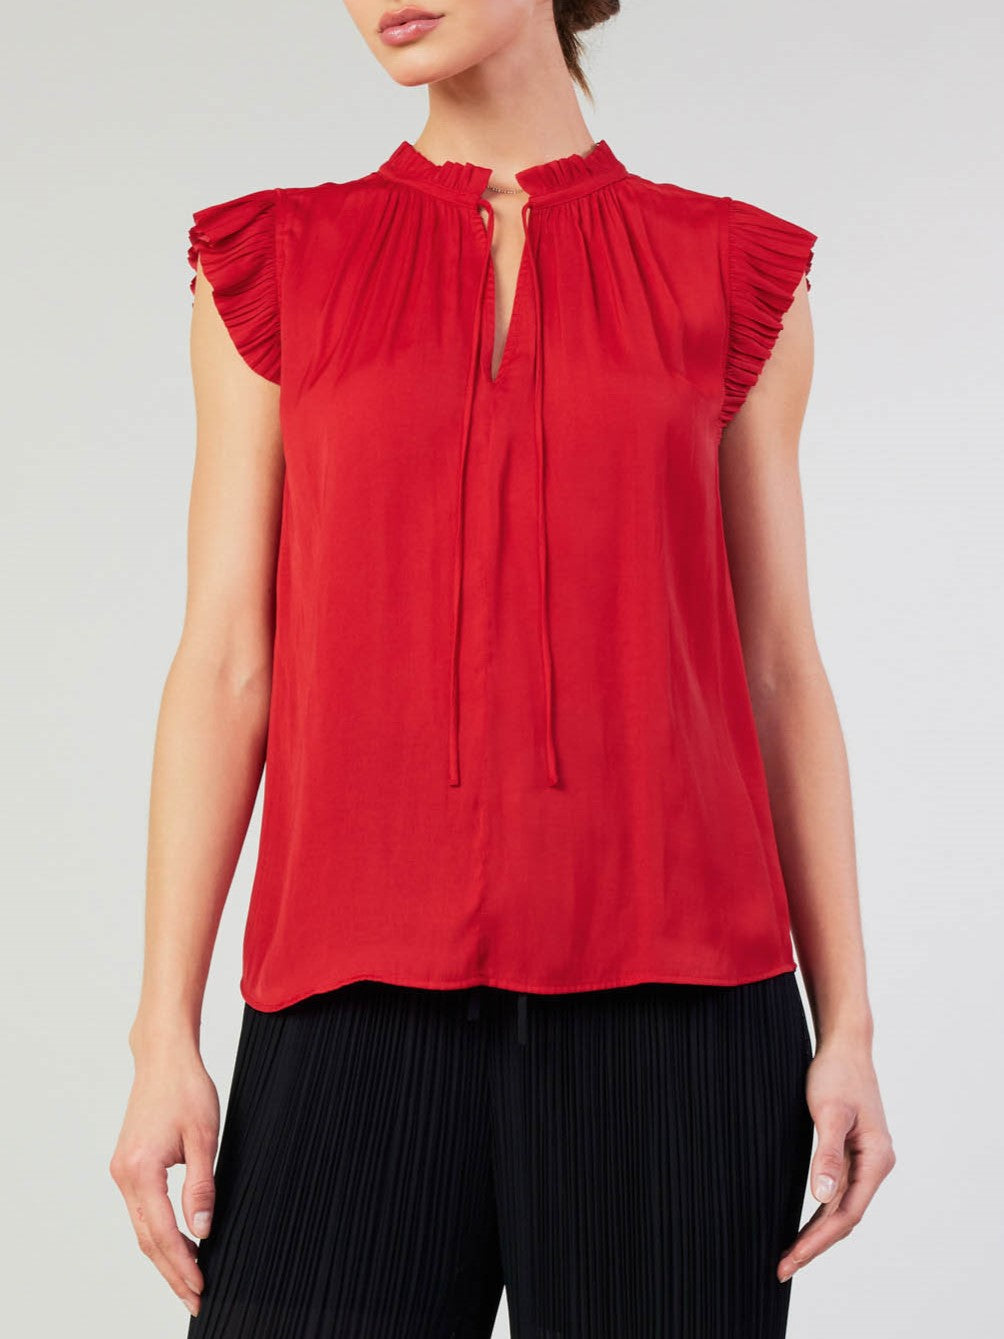 Be Bold Blouse - Red